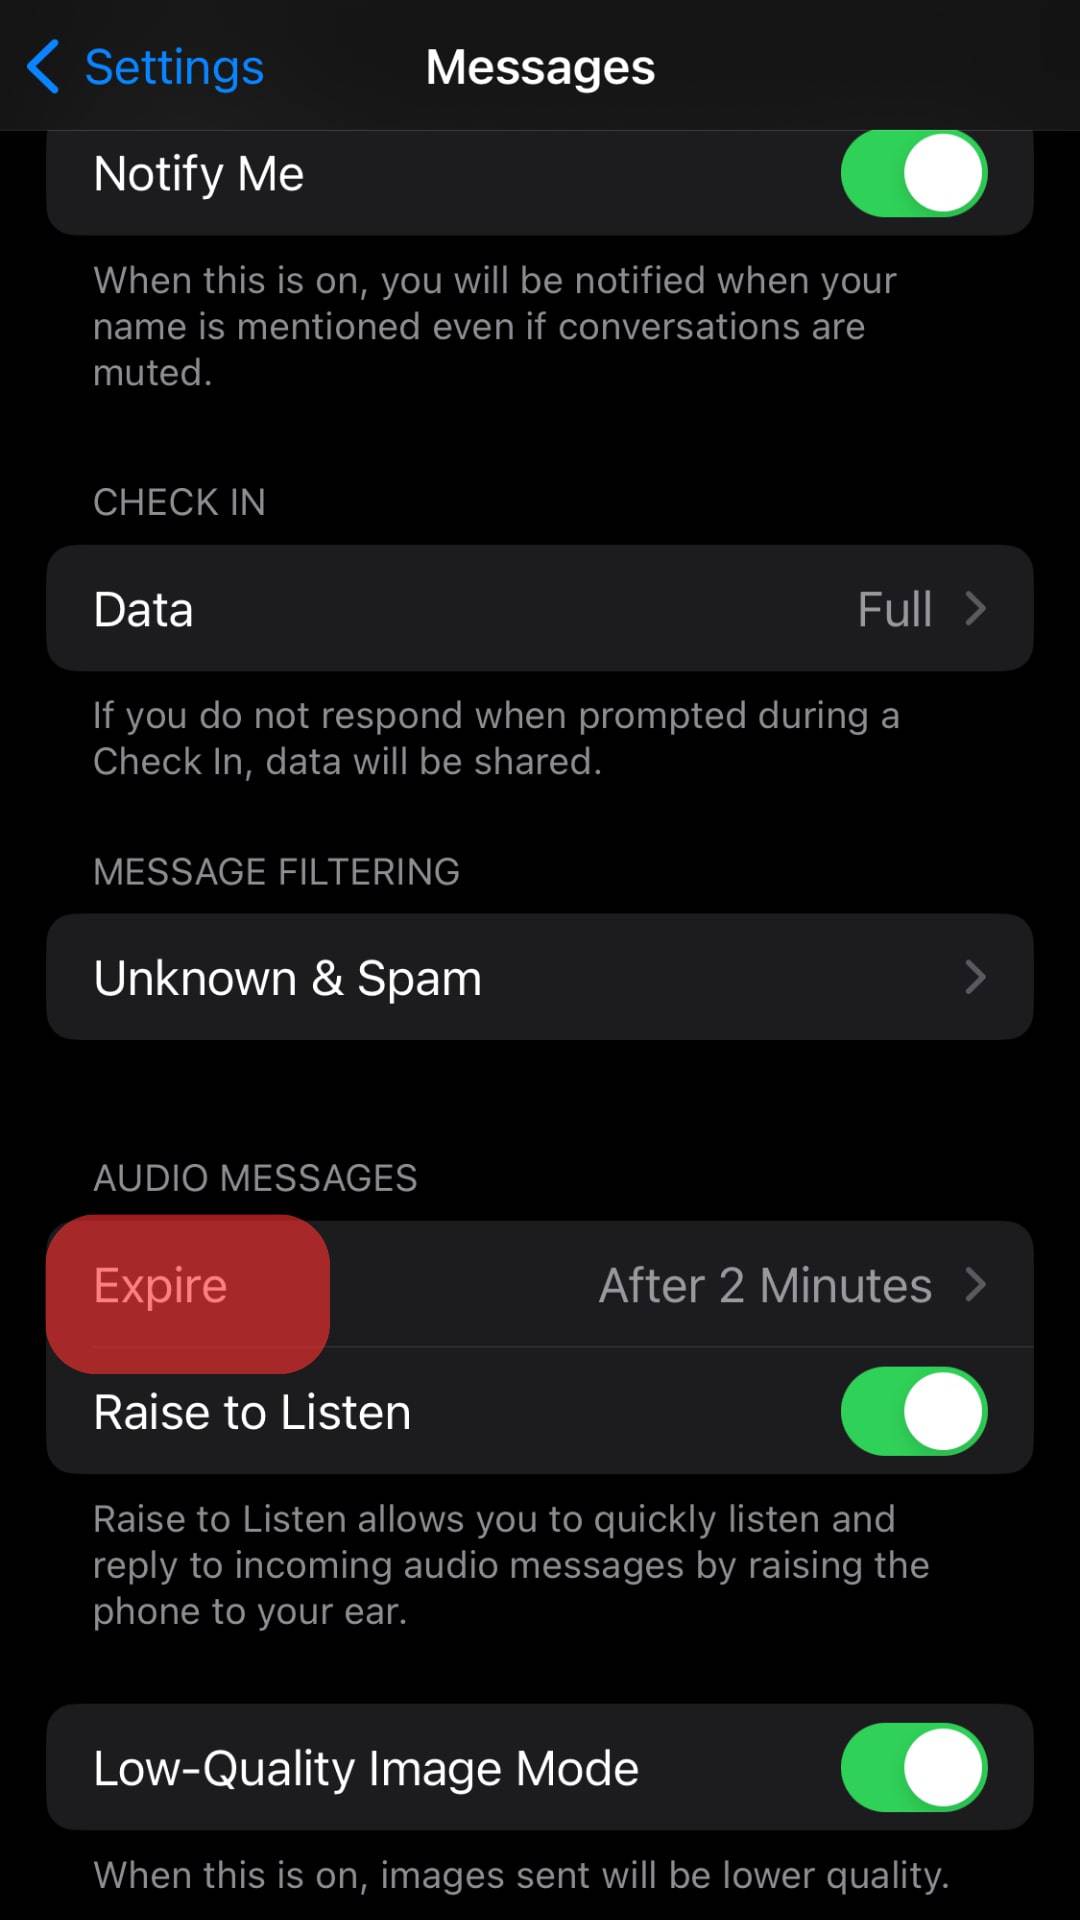 Navigate To ‘Expire’ Under ‘Audio Messages.’